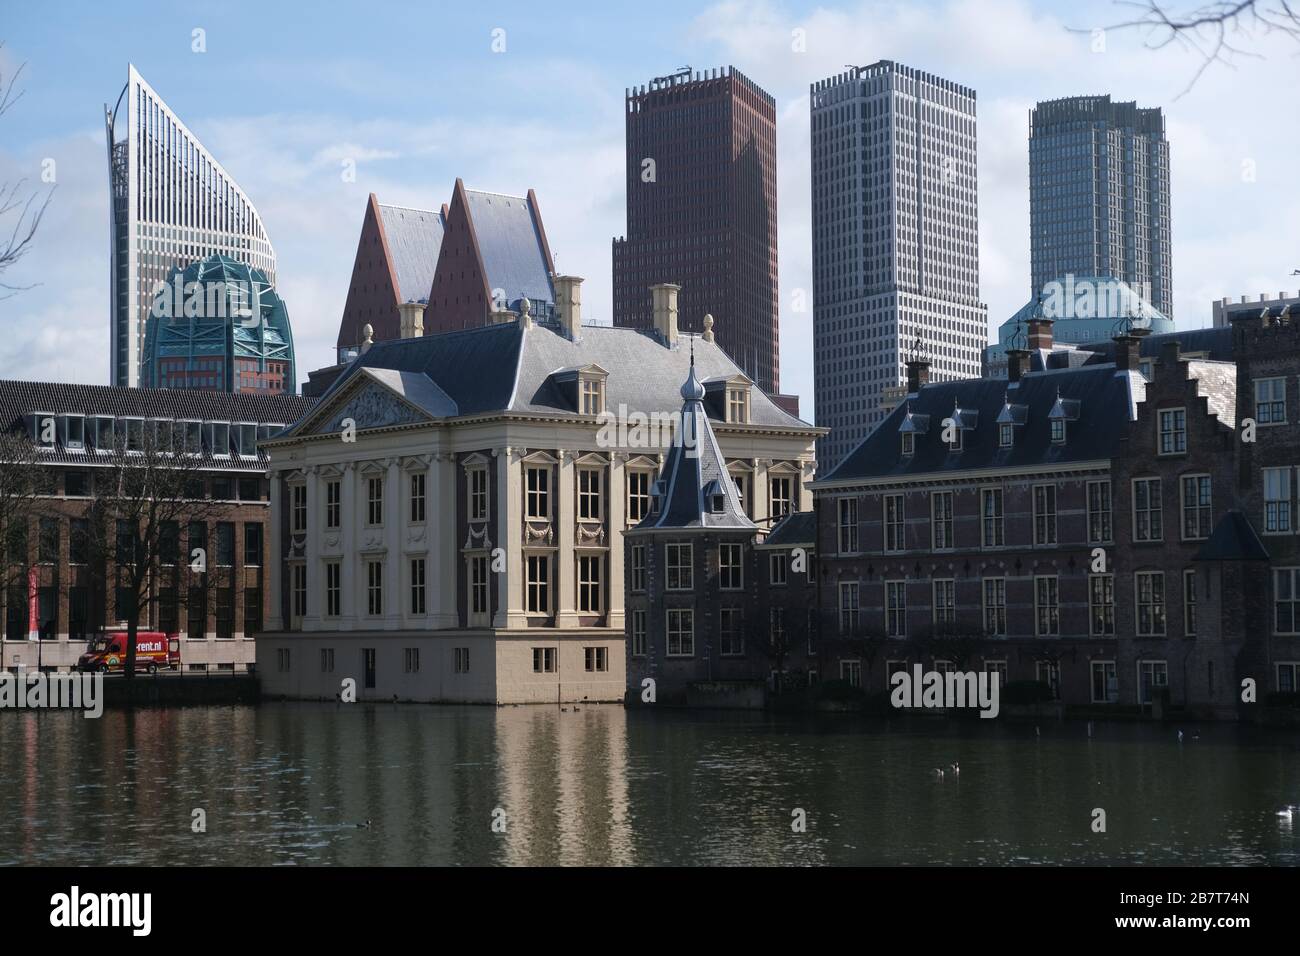 Dutch Prime Minister Mark Rutte's official office called het Torentje, or the 'The Little Tower', is seen next to the Mauritshuis museum, on March 16, 2020 in The Hague, Netherlands. Credit: Yuriko Nakao/AFLO/Alamy Live News Stock Photo